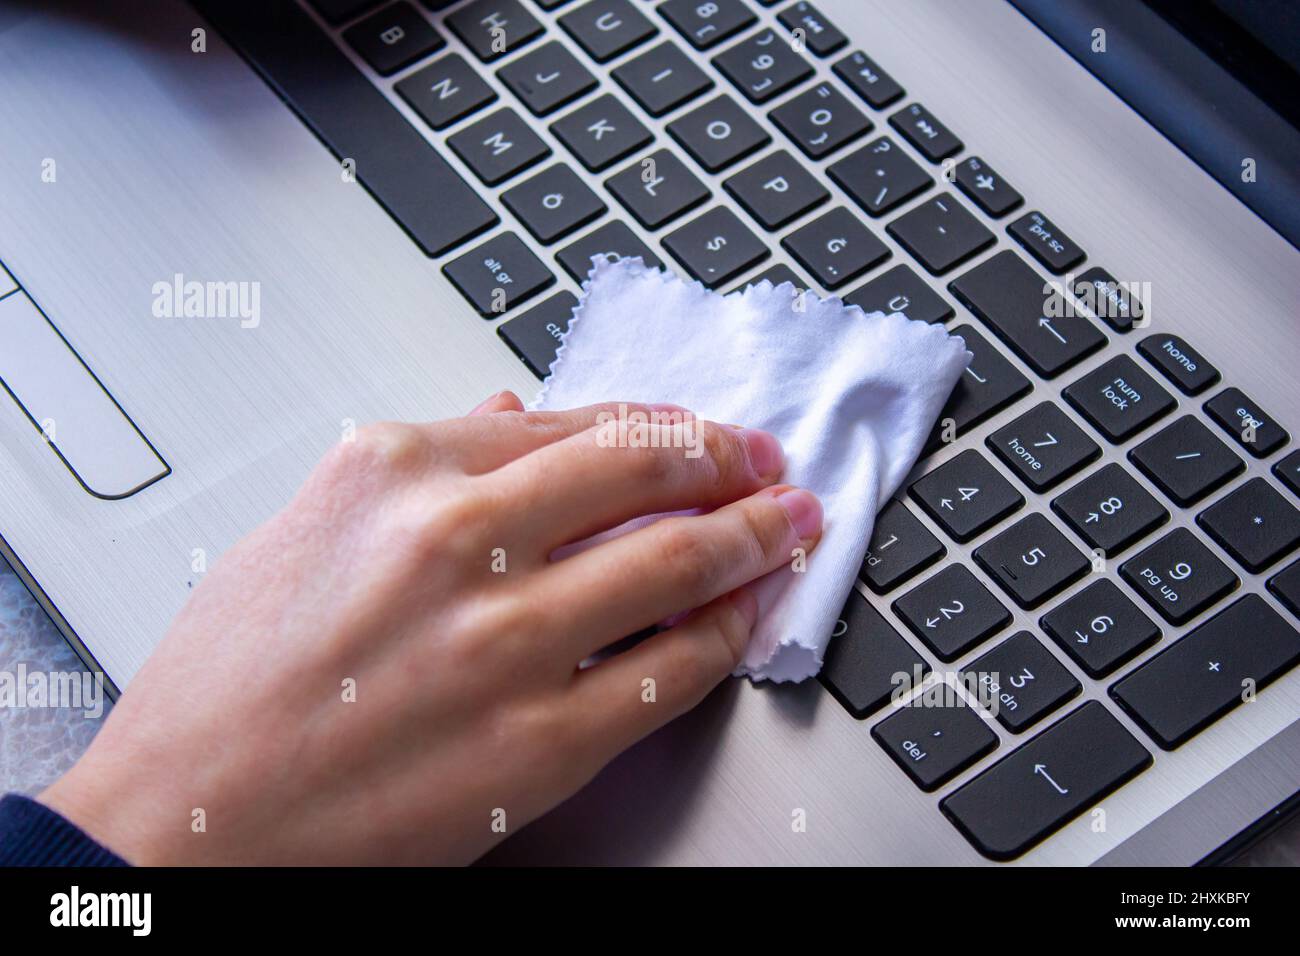 Woman cleaning laptop keyboard with a white cloth. Stock Photo